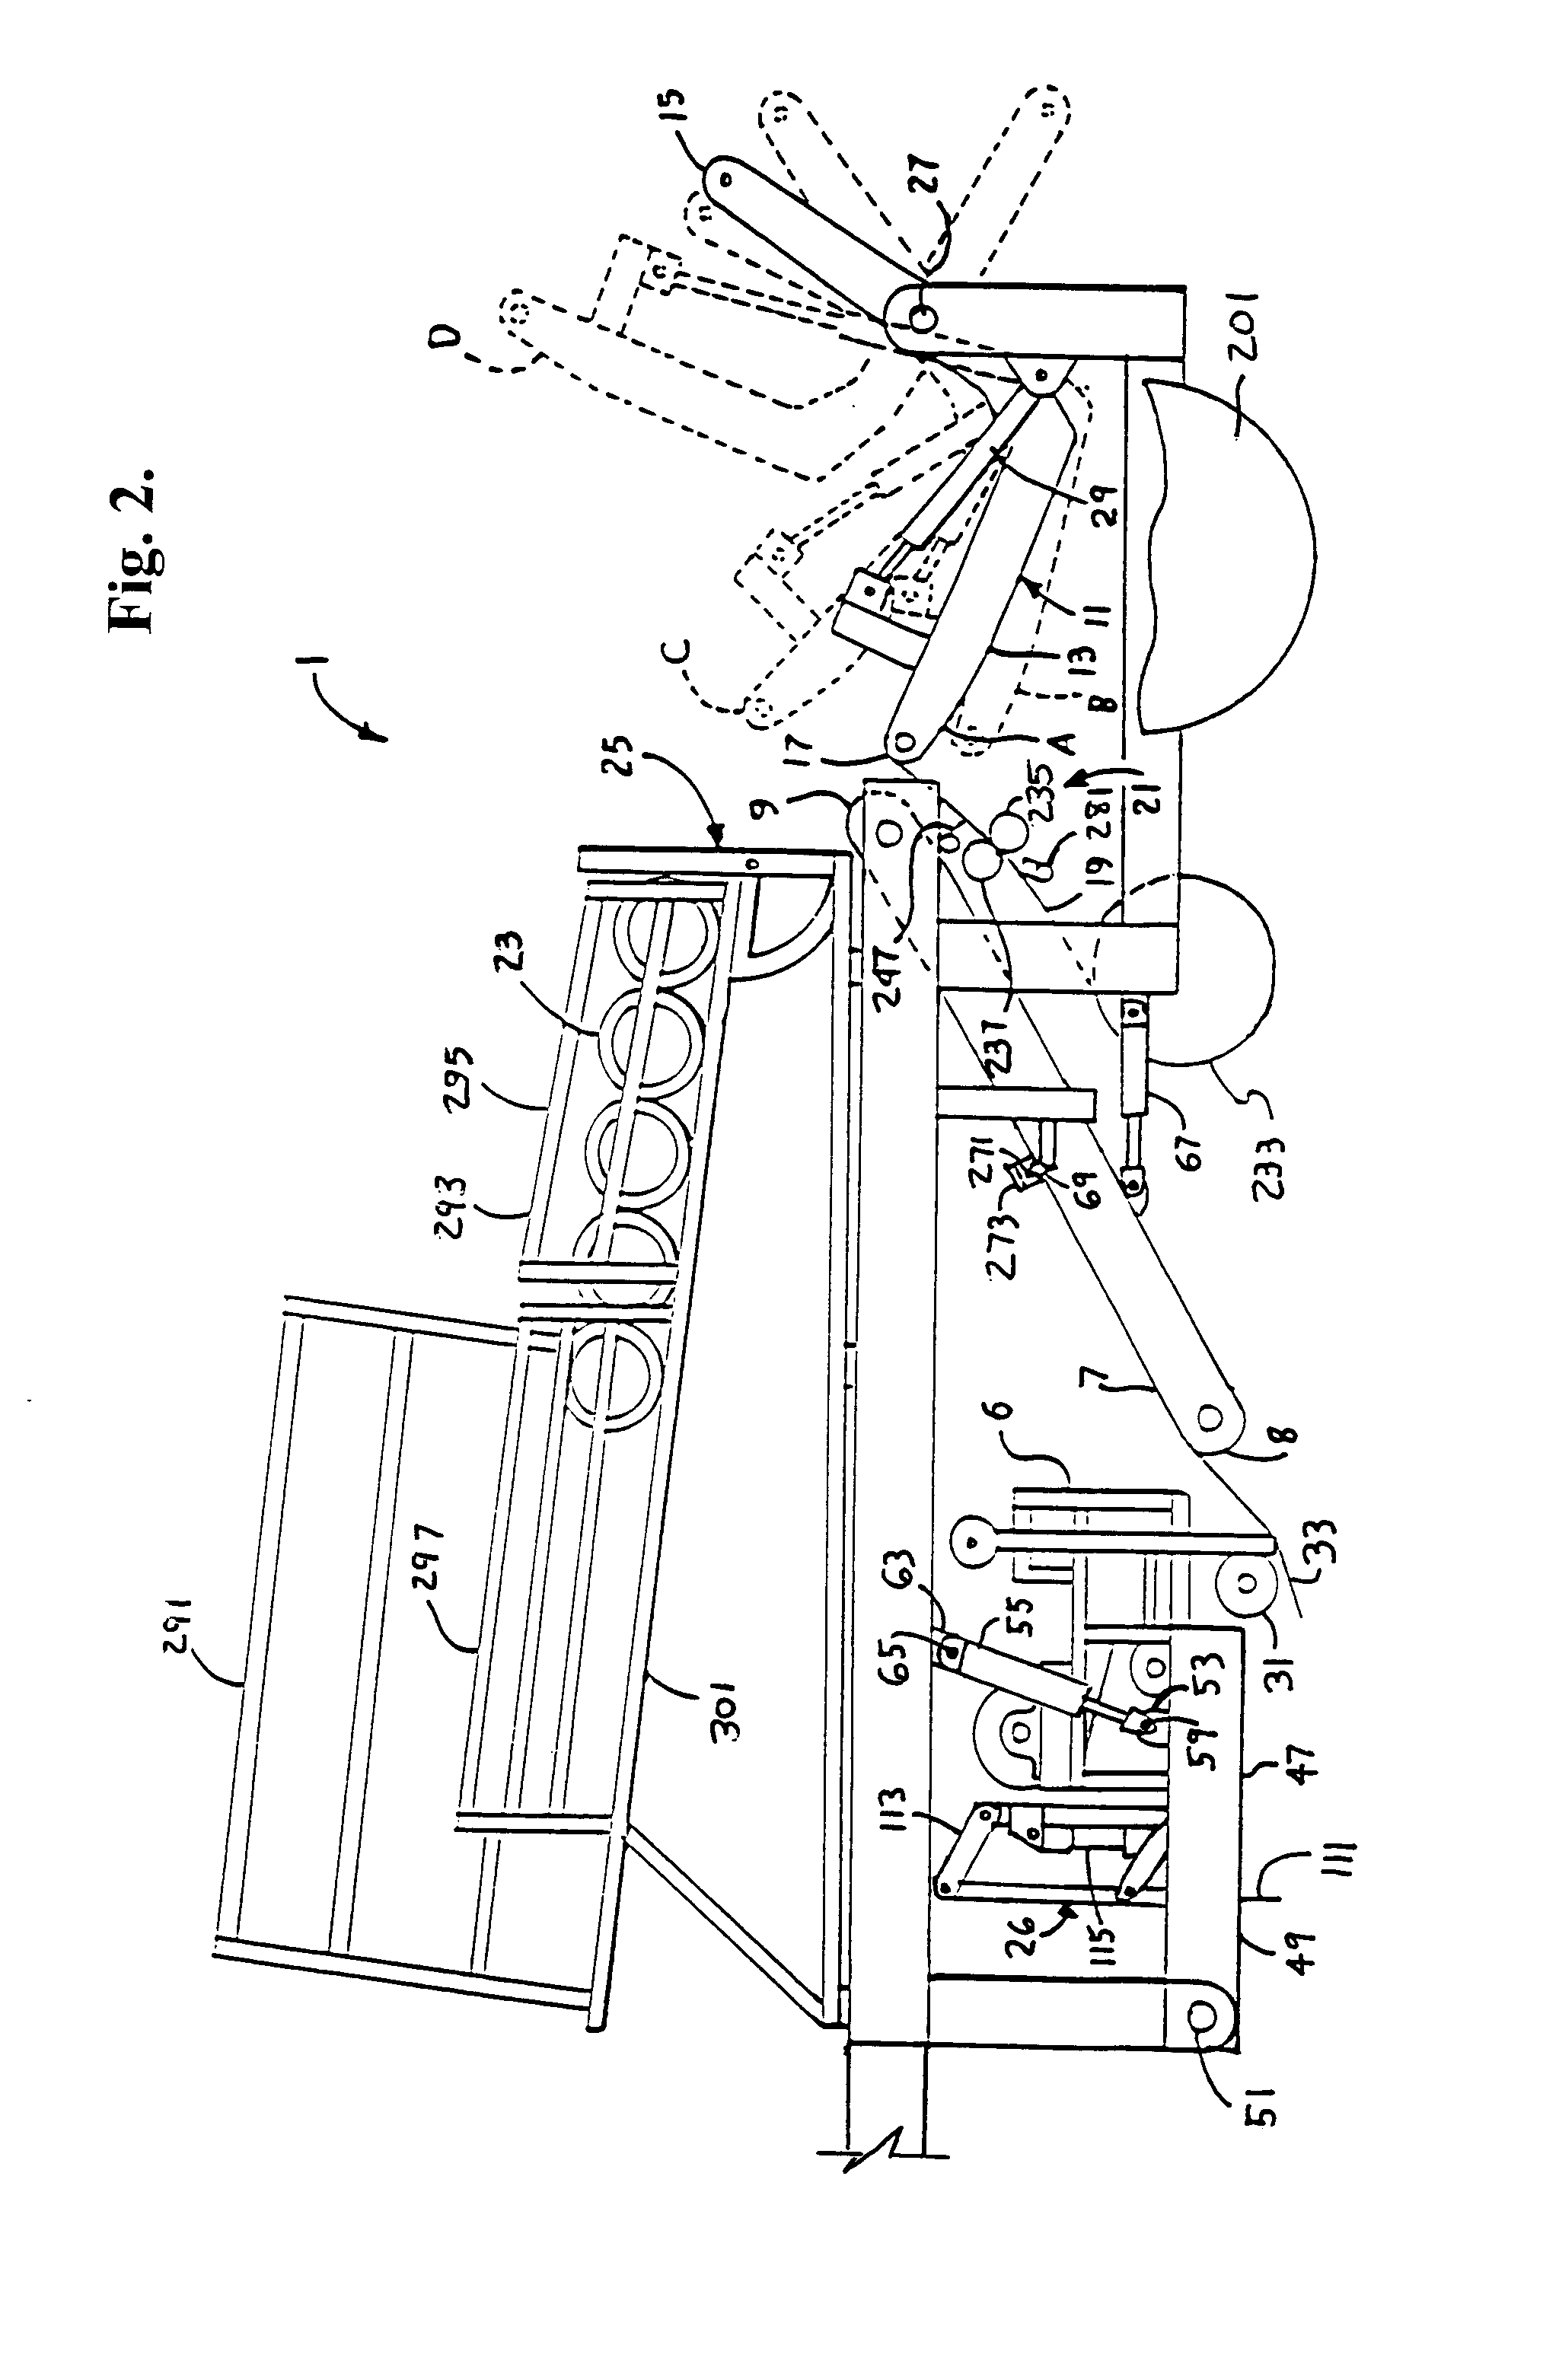 Sod harvester with controlled sod cut-off and conveying system